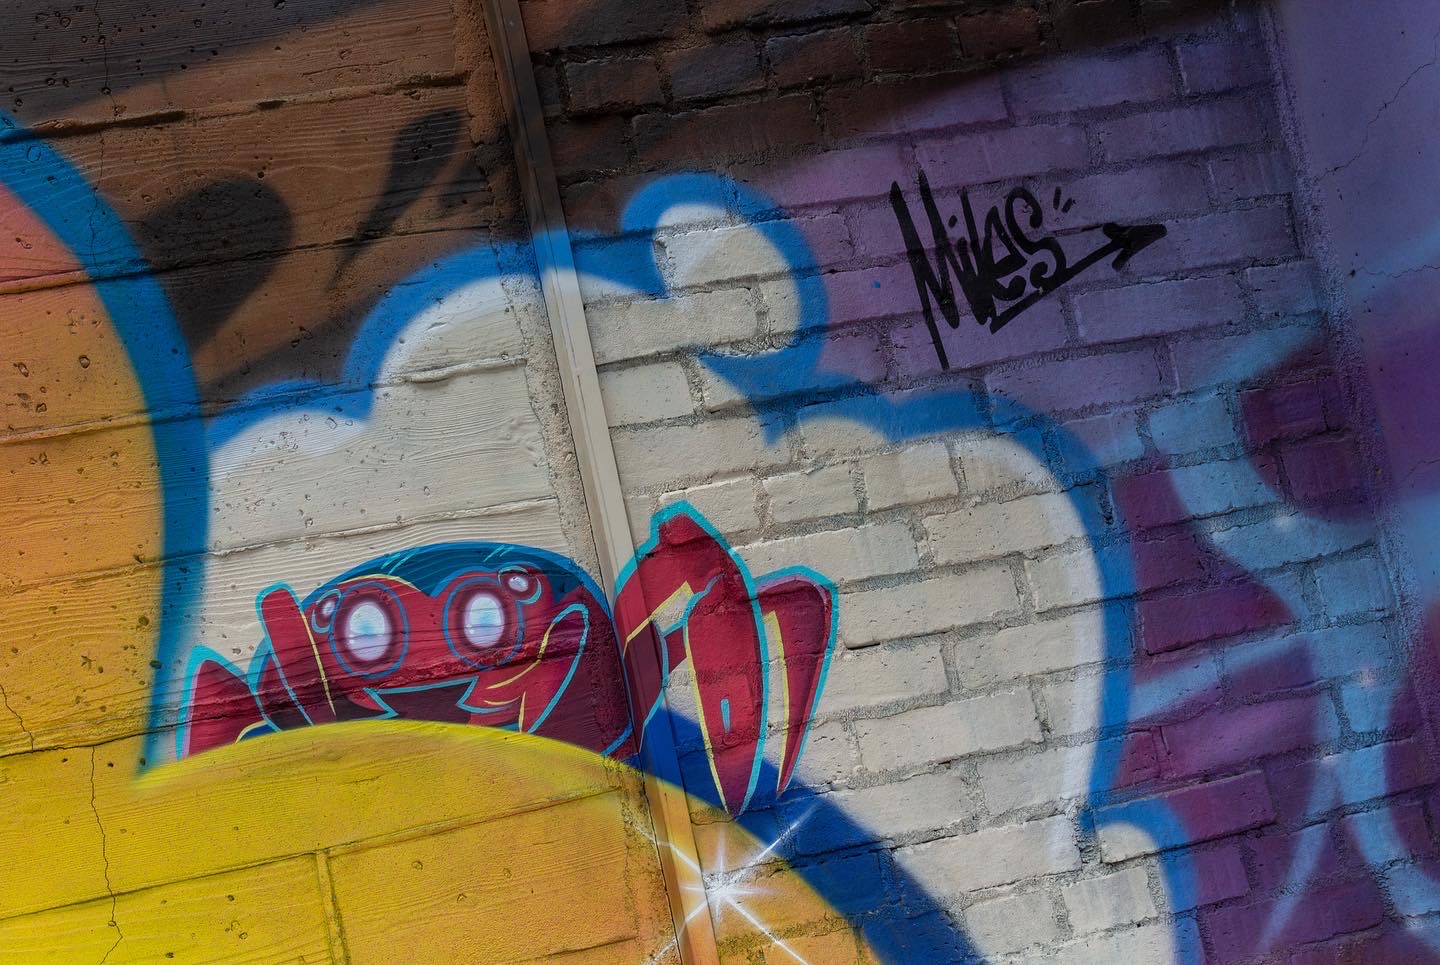 Section of brightly-colored street art with a stylized Spider-Bot